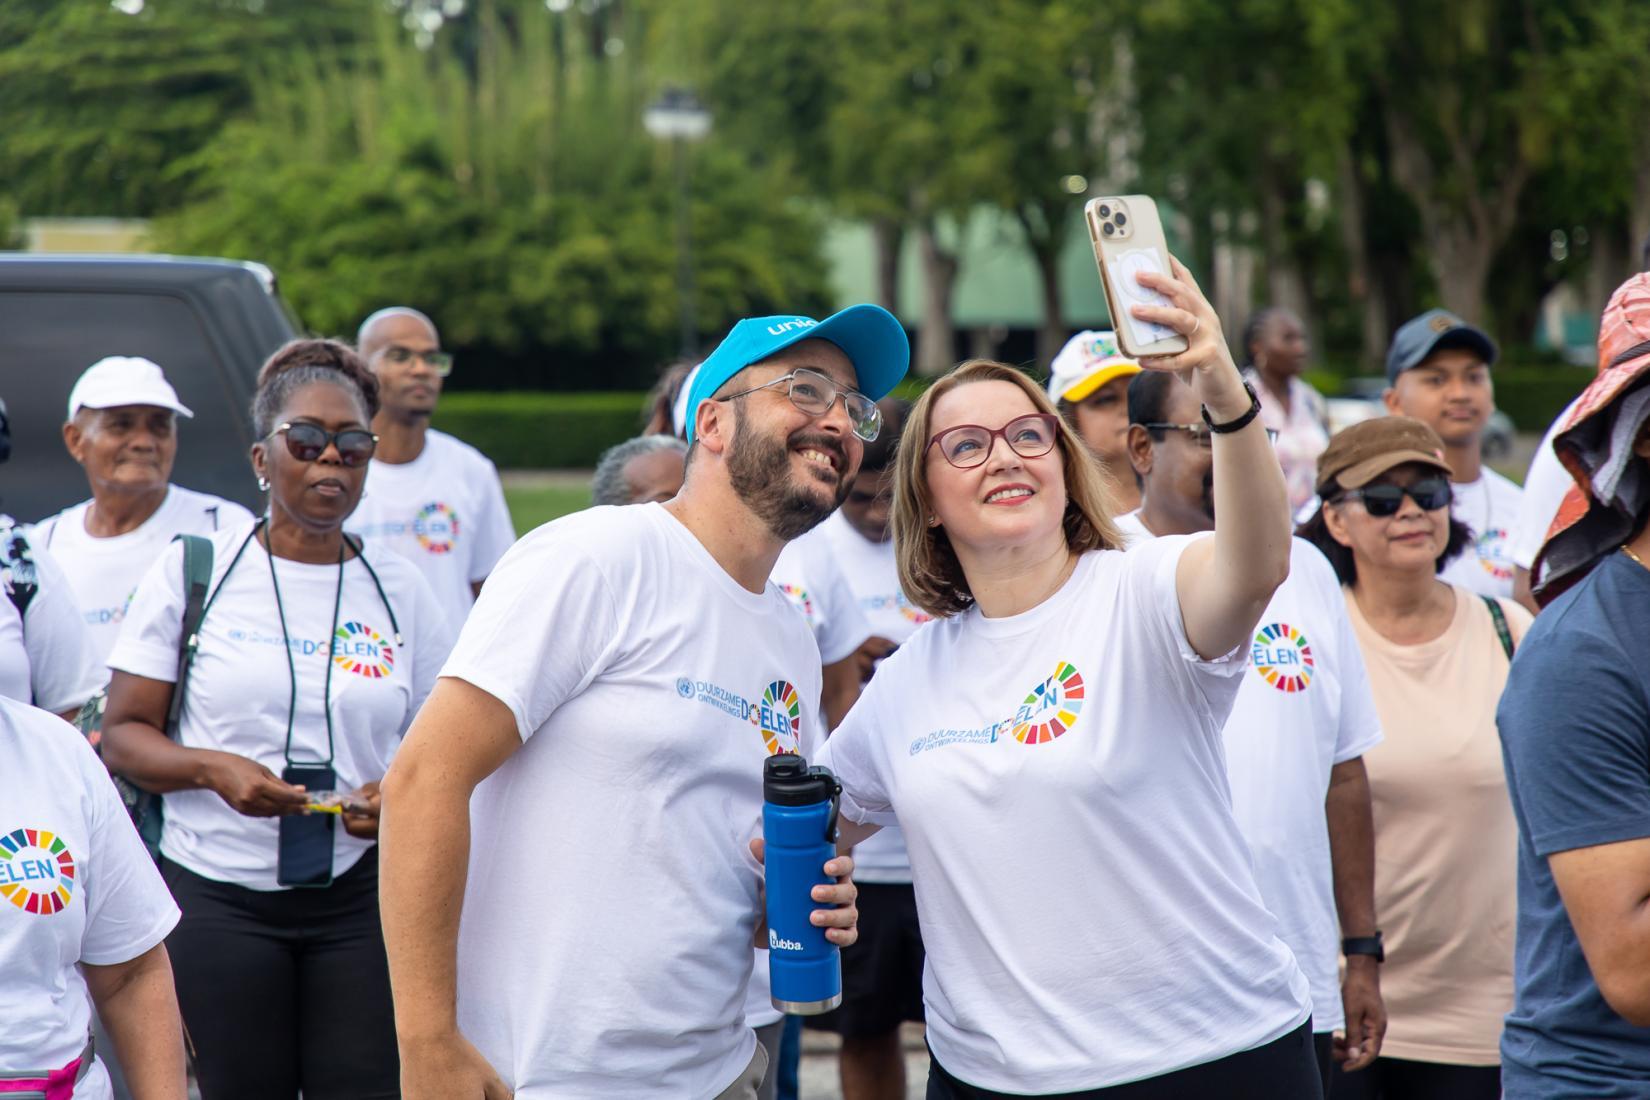 A woman raises an iPhone for a 'selfie' with a man while smiling in SDG shirts. 